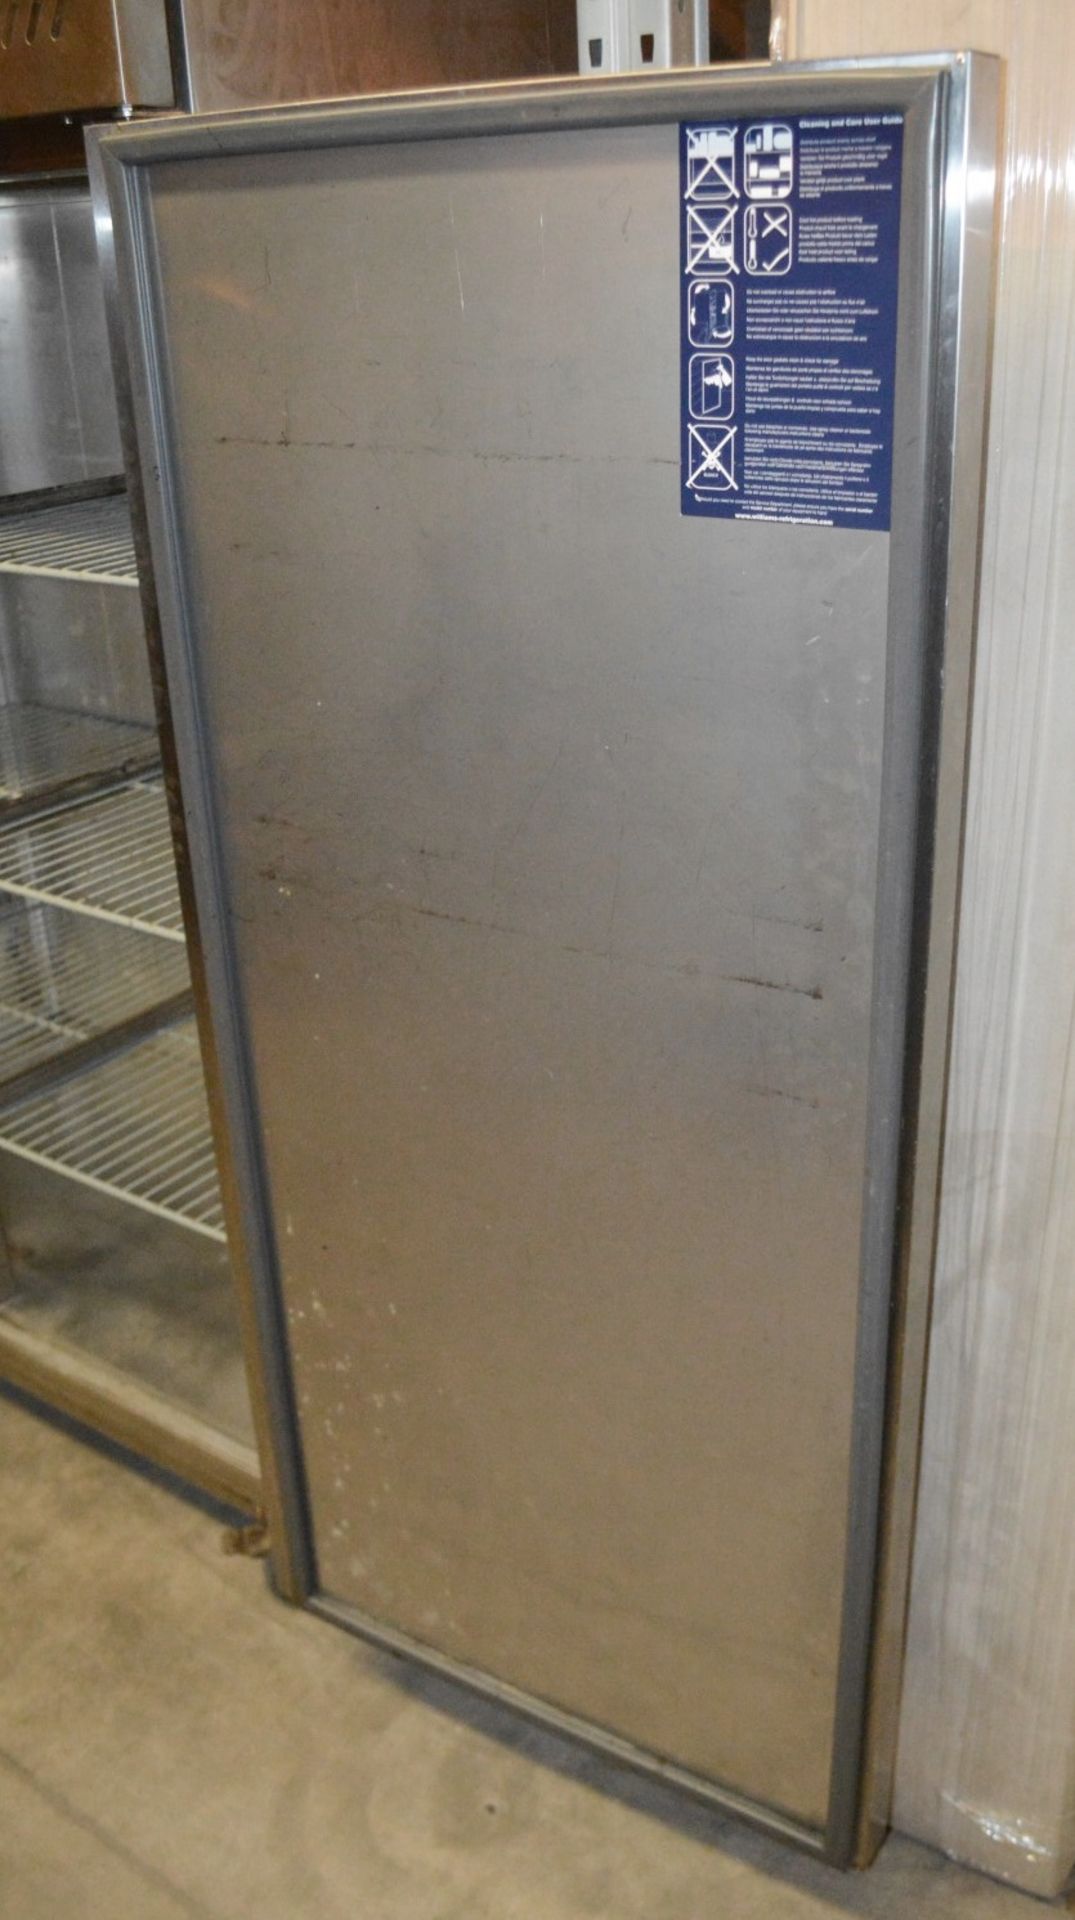 1 x WILLIAMS Upright 2-Door Stainless Steel Commercial Chiller Unit - Dimensions: H195 x W140 x - Image 9 of 12